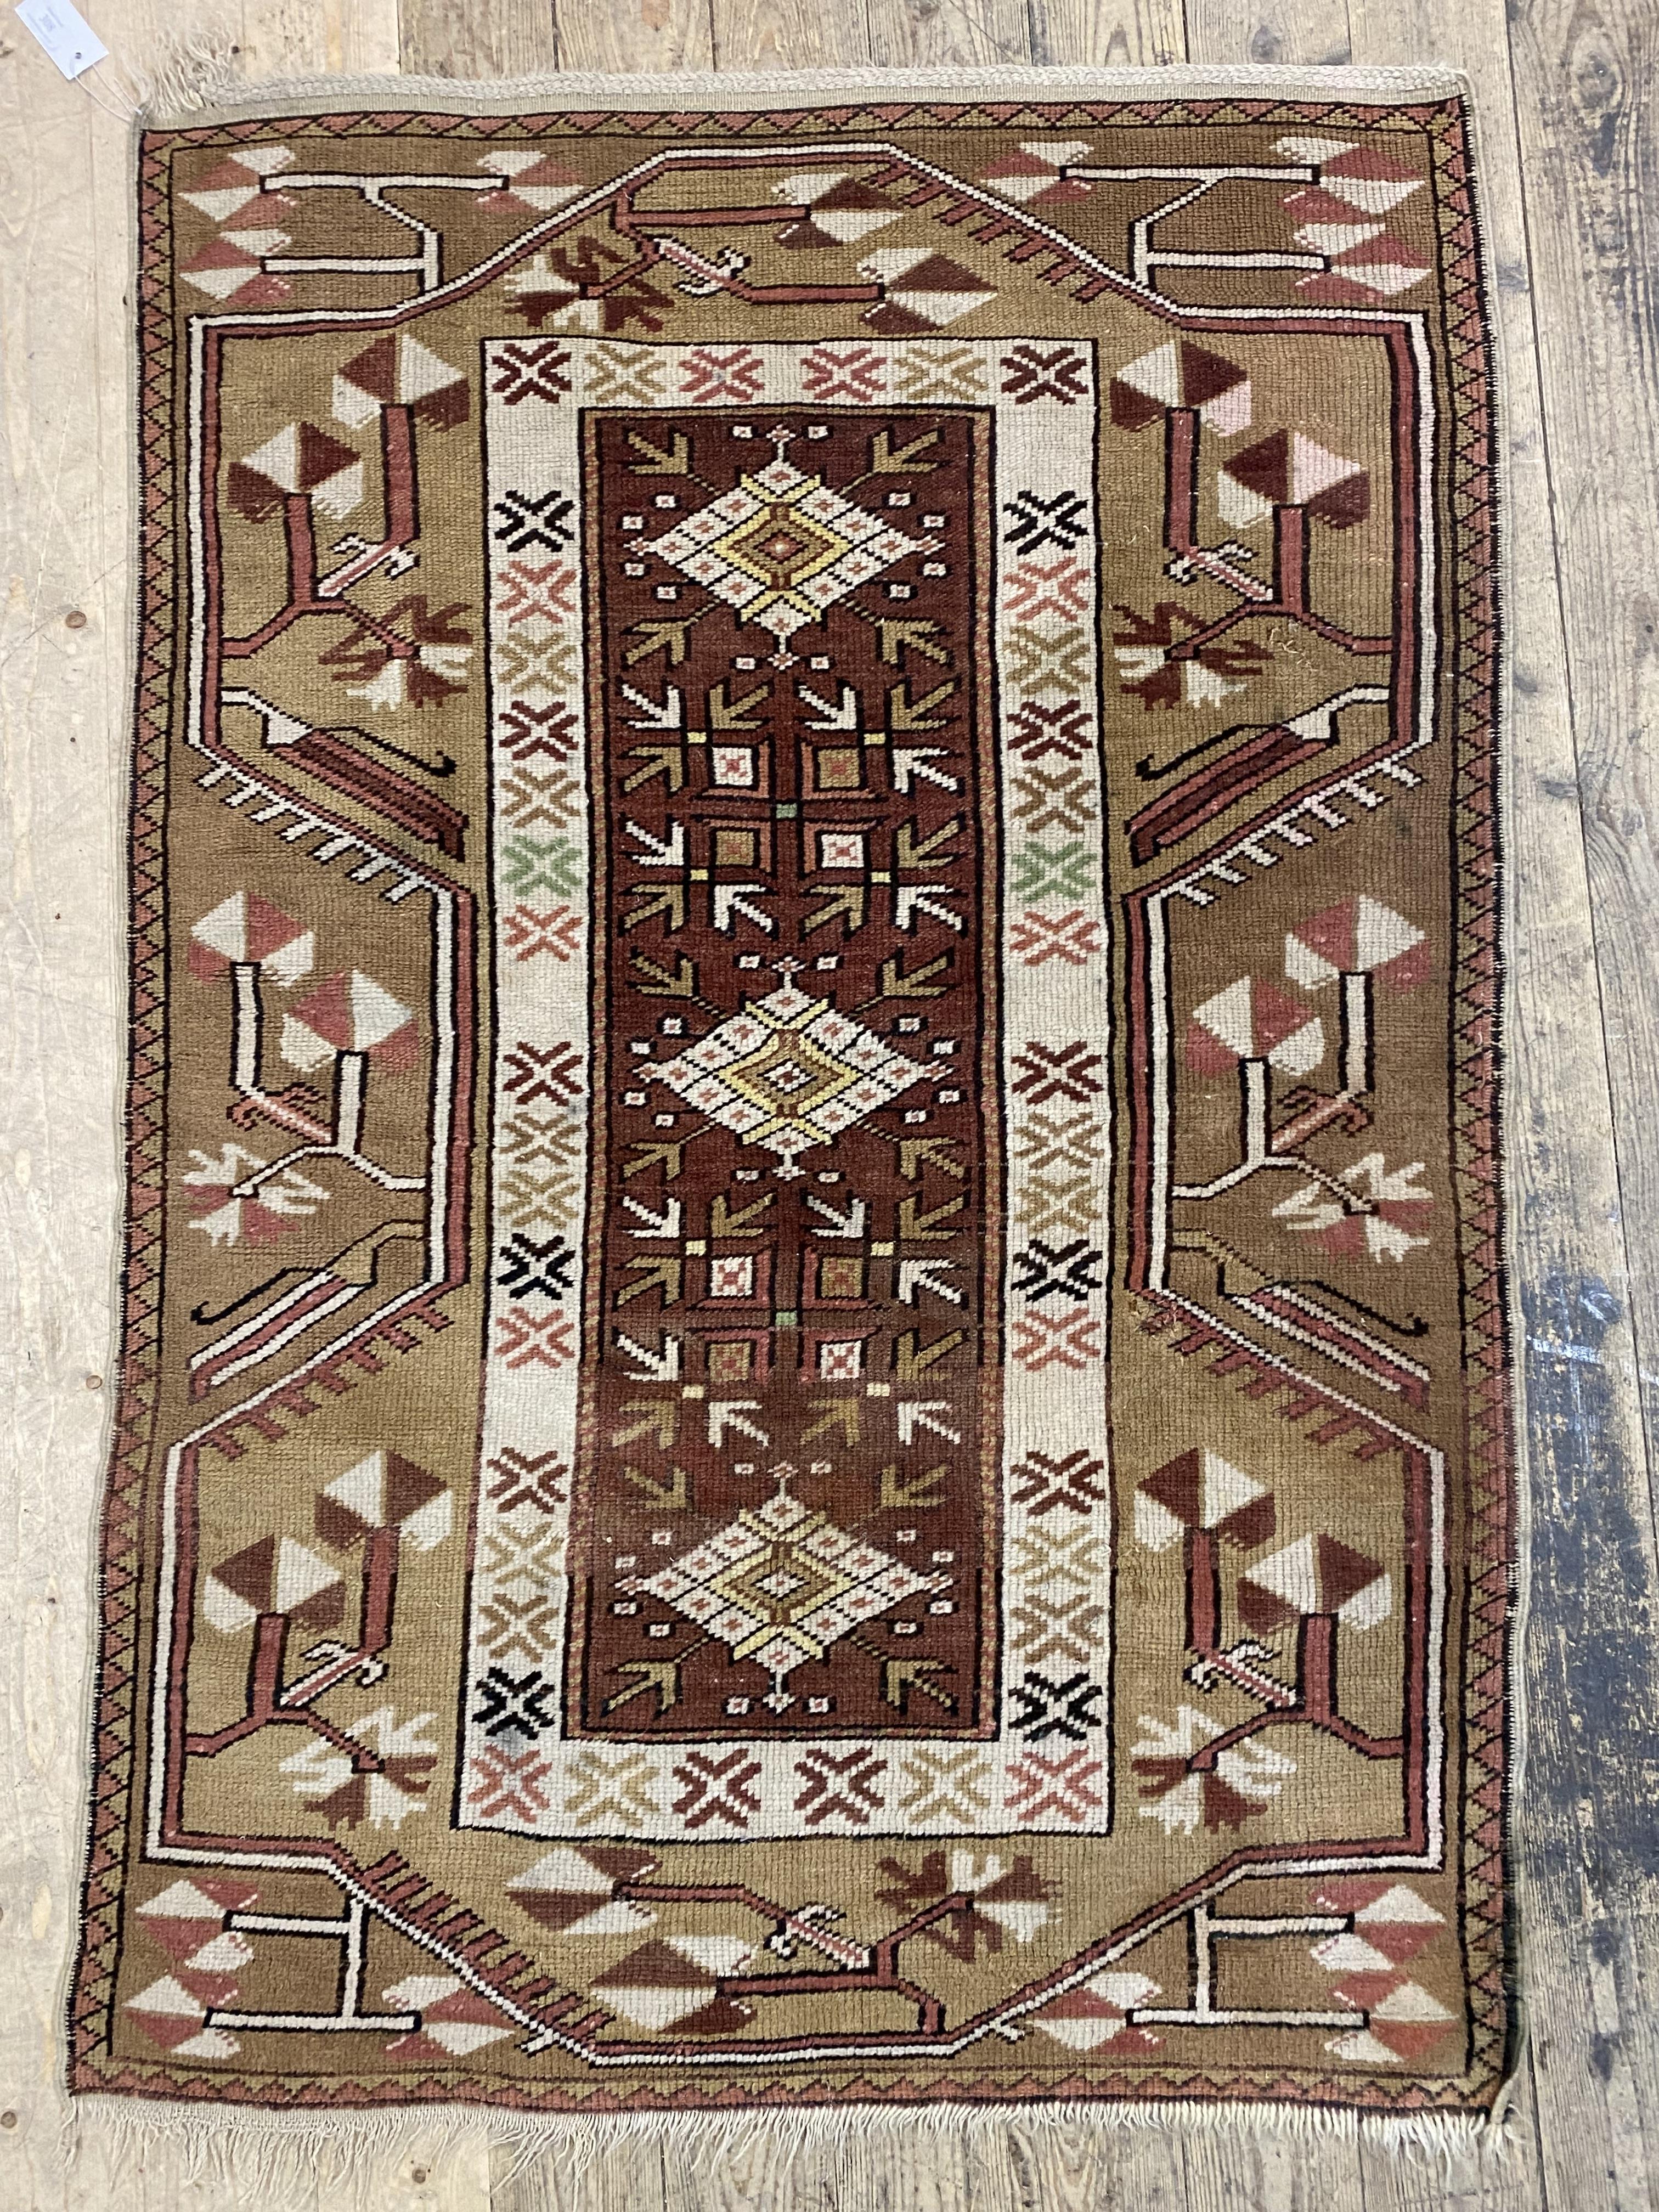 A hand knotted Turkish rug in a brown and red palette, of typical design 142cm x 96cm